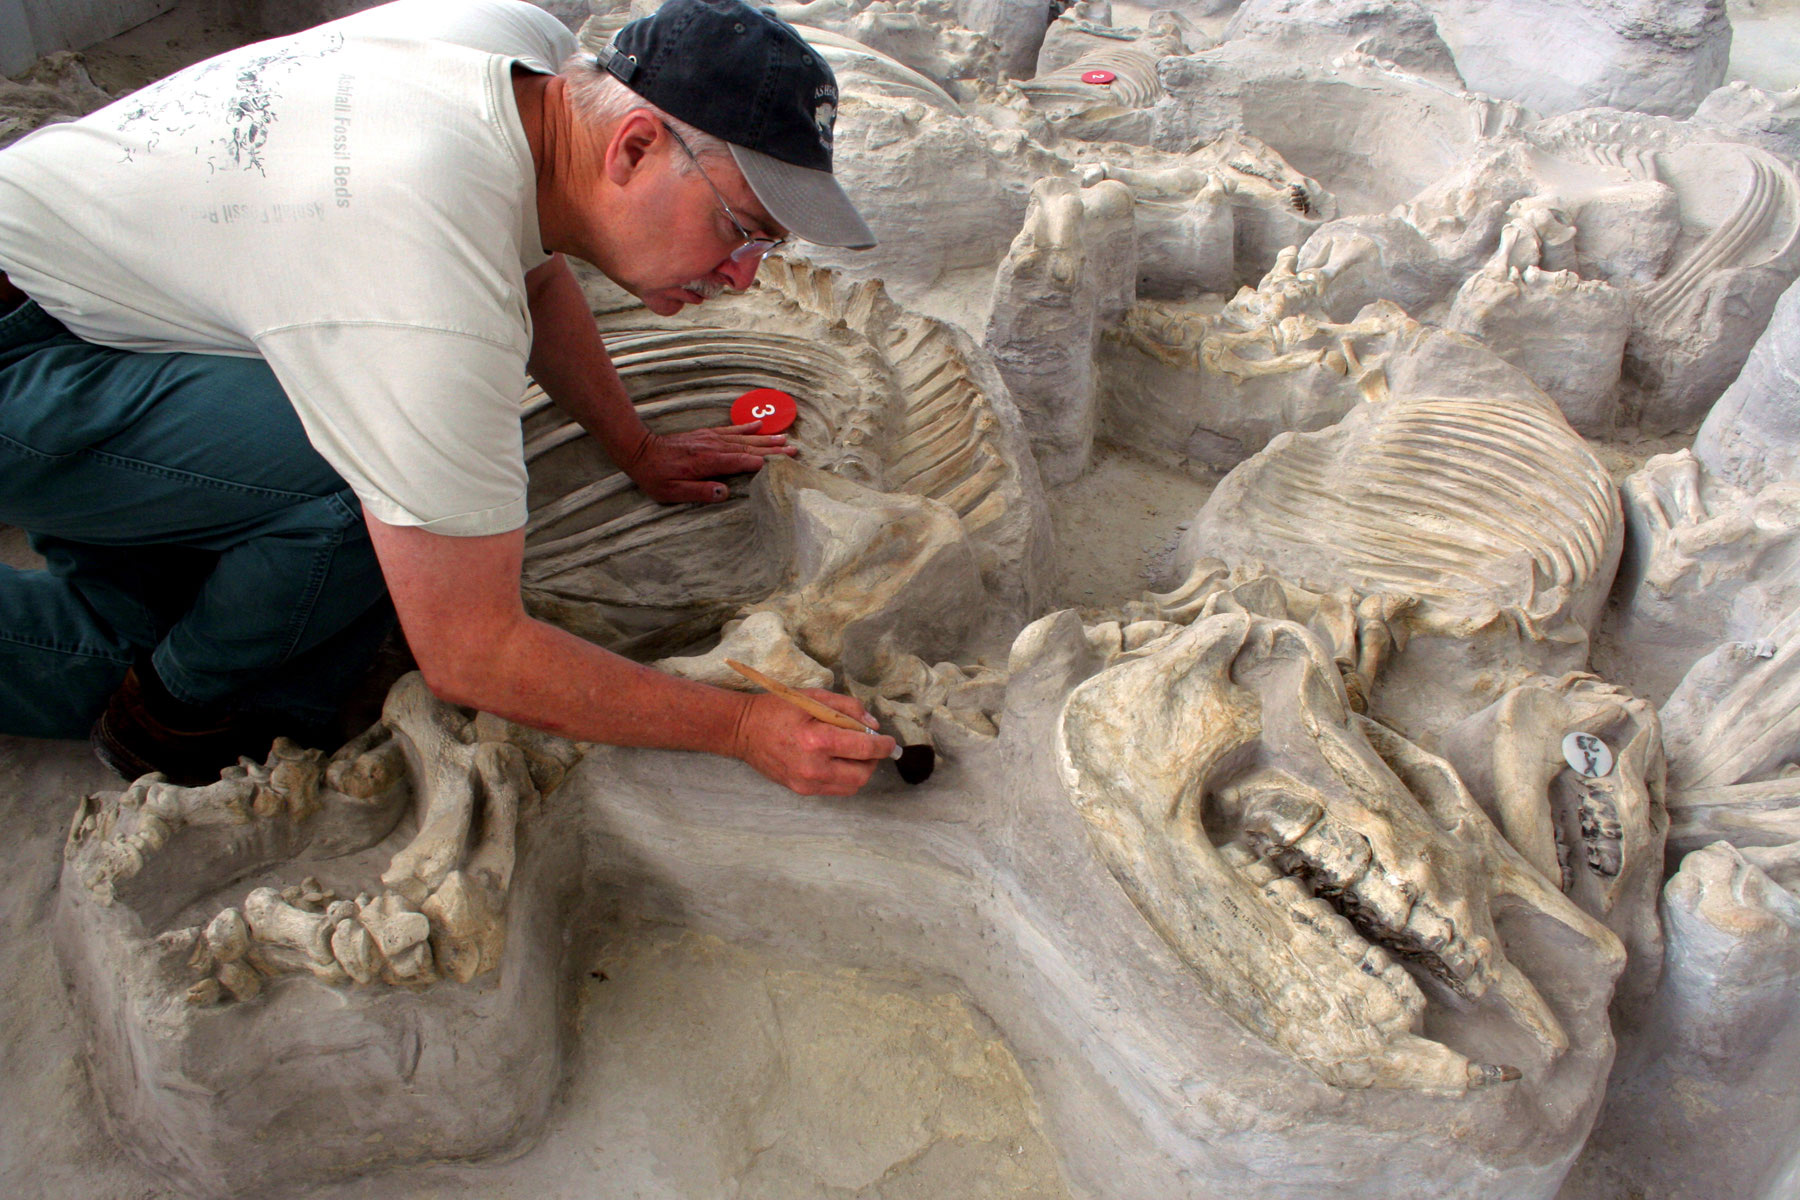 Retired Chief Preparator Greg Brown at Ashfall Fossil Beds